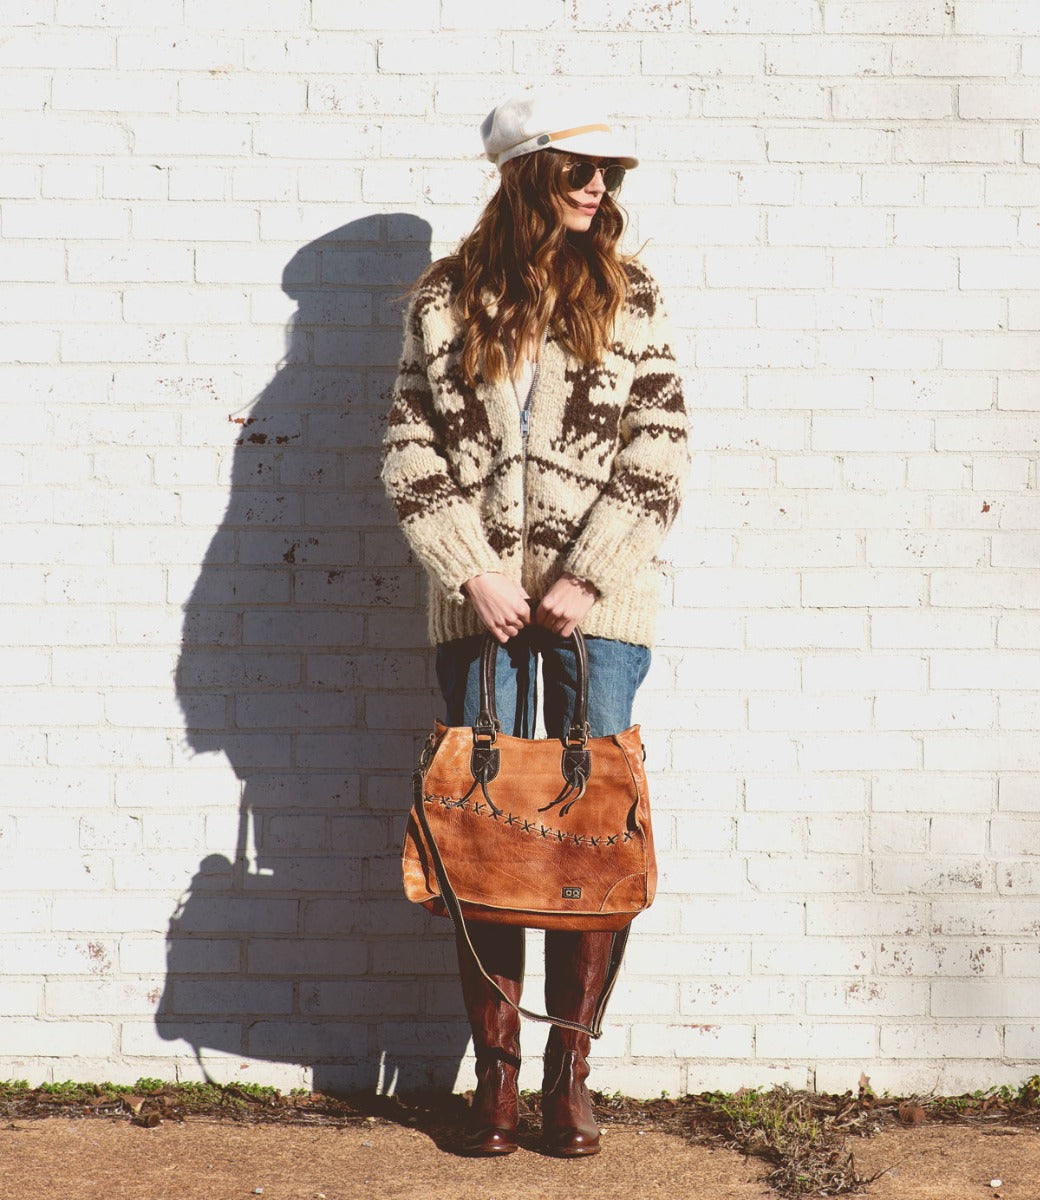 A woman holding a Bruna bag in front of a brick wall, made by Bed Stu.